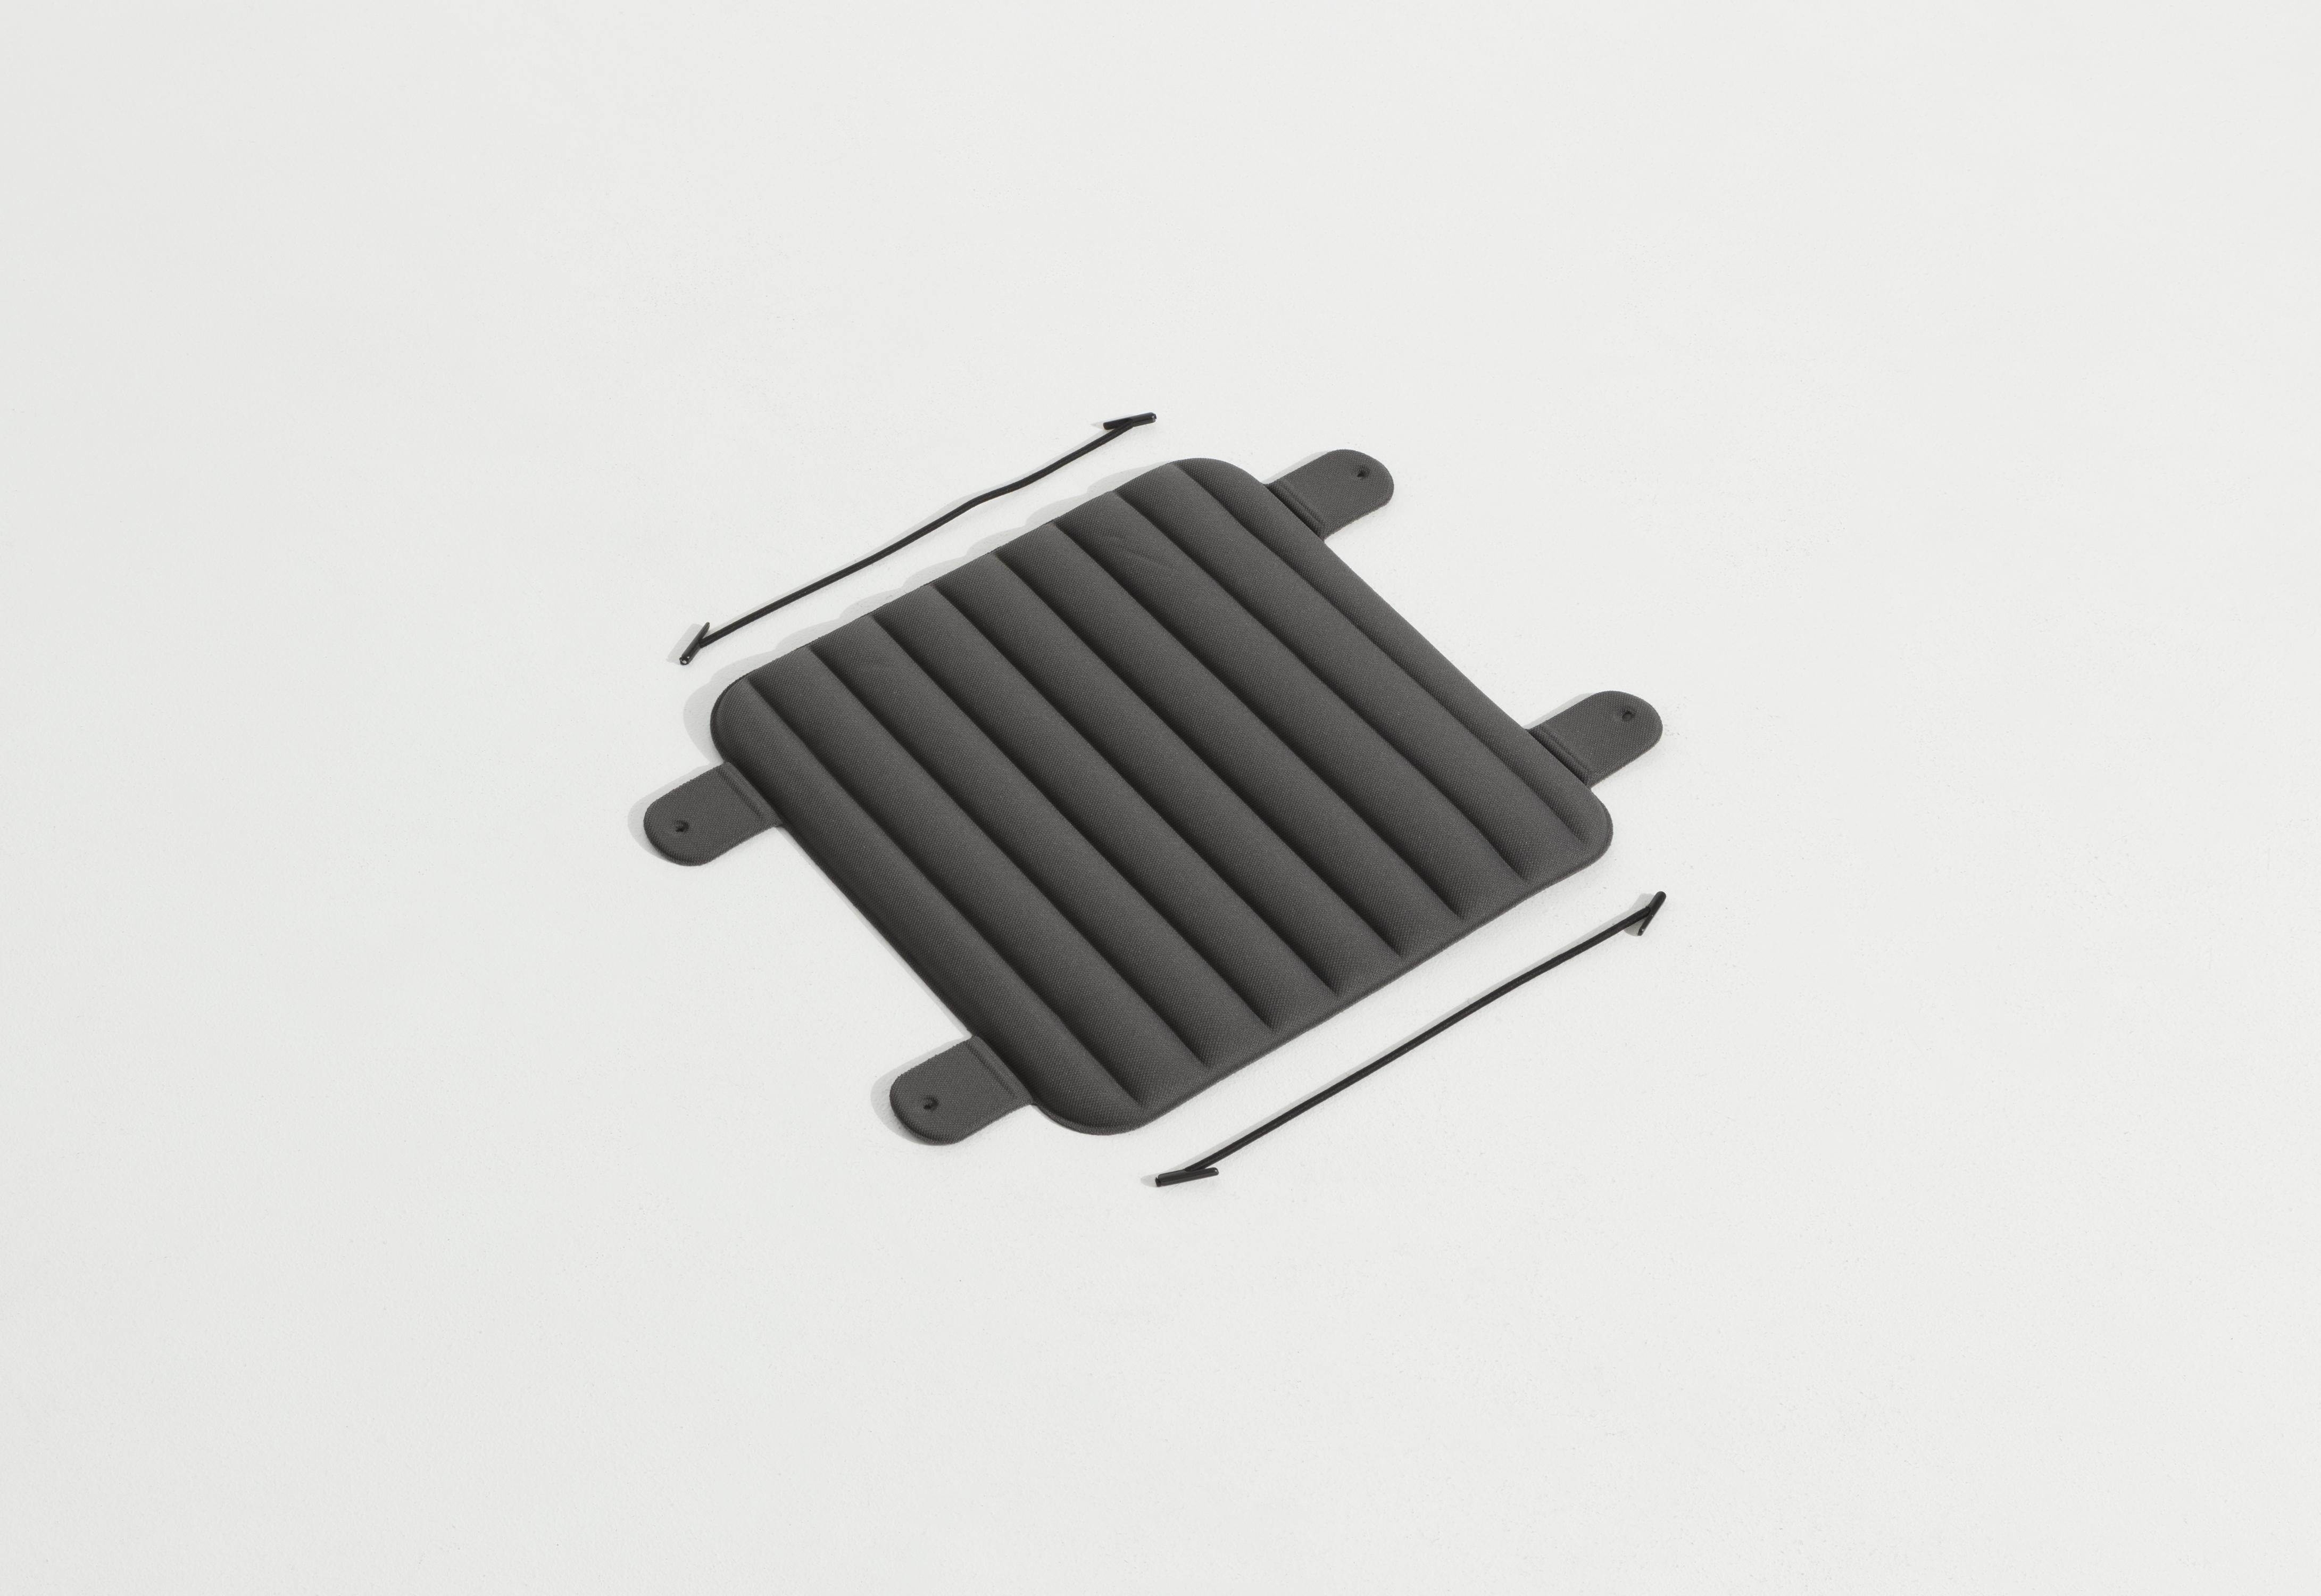 Petite Friture Week-End Samll Seat Cushions in Anthracite by Studio BrichetZiegler, 2019

The week-end collection is a full range of outdoor furniture, in aluminium grained epoxy paint, matt finish, that includes 18 functions and 8 colours for the